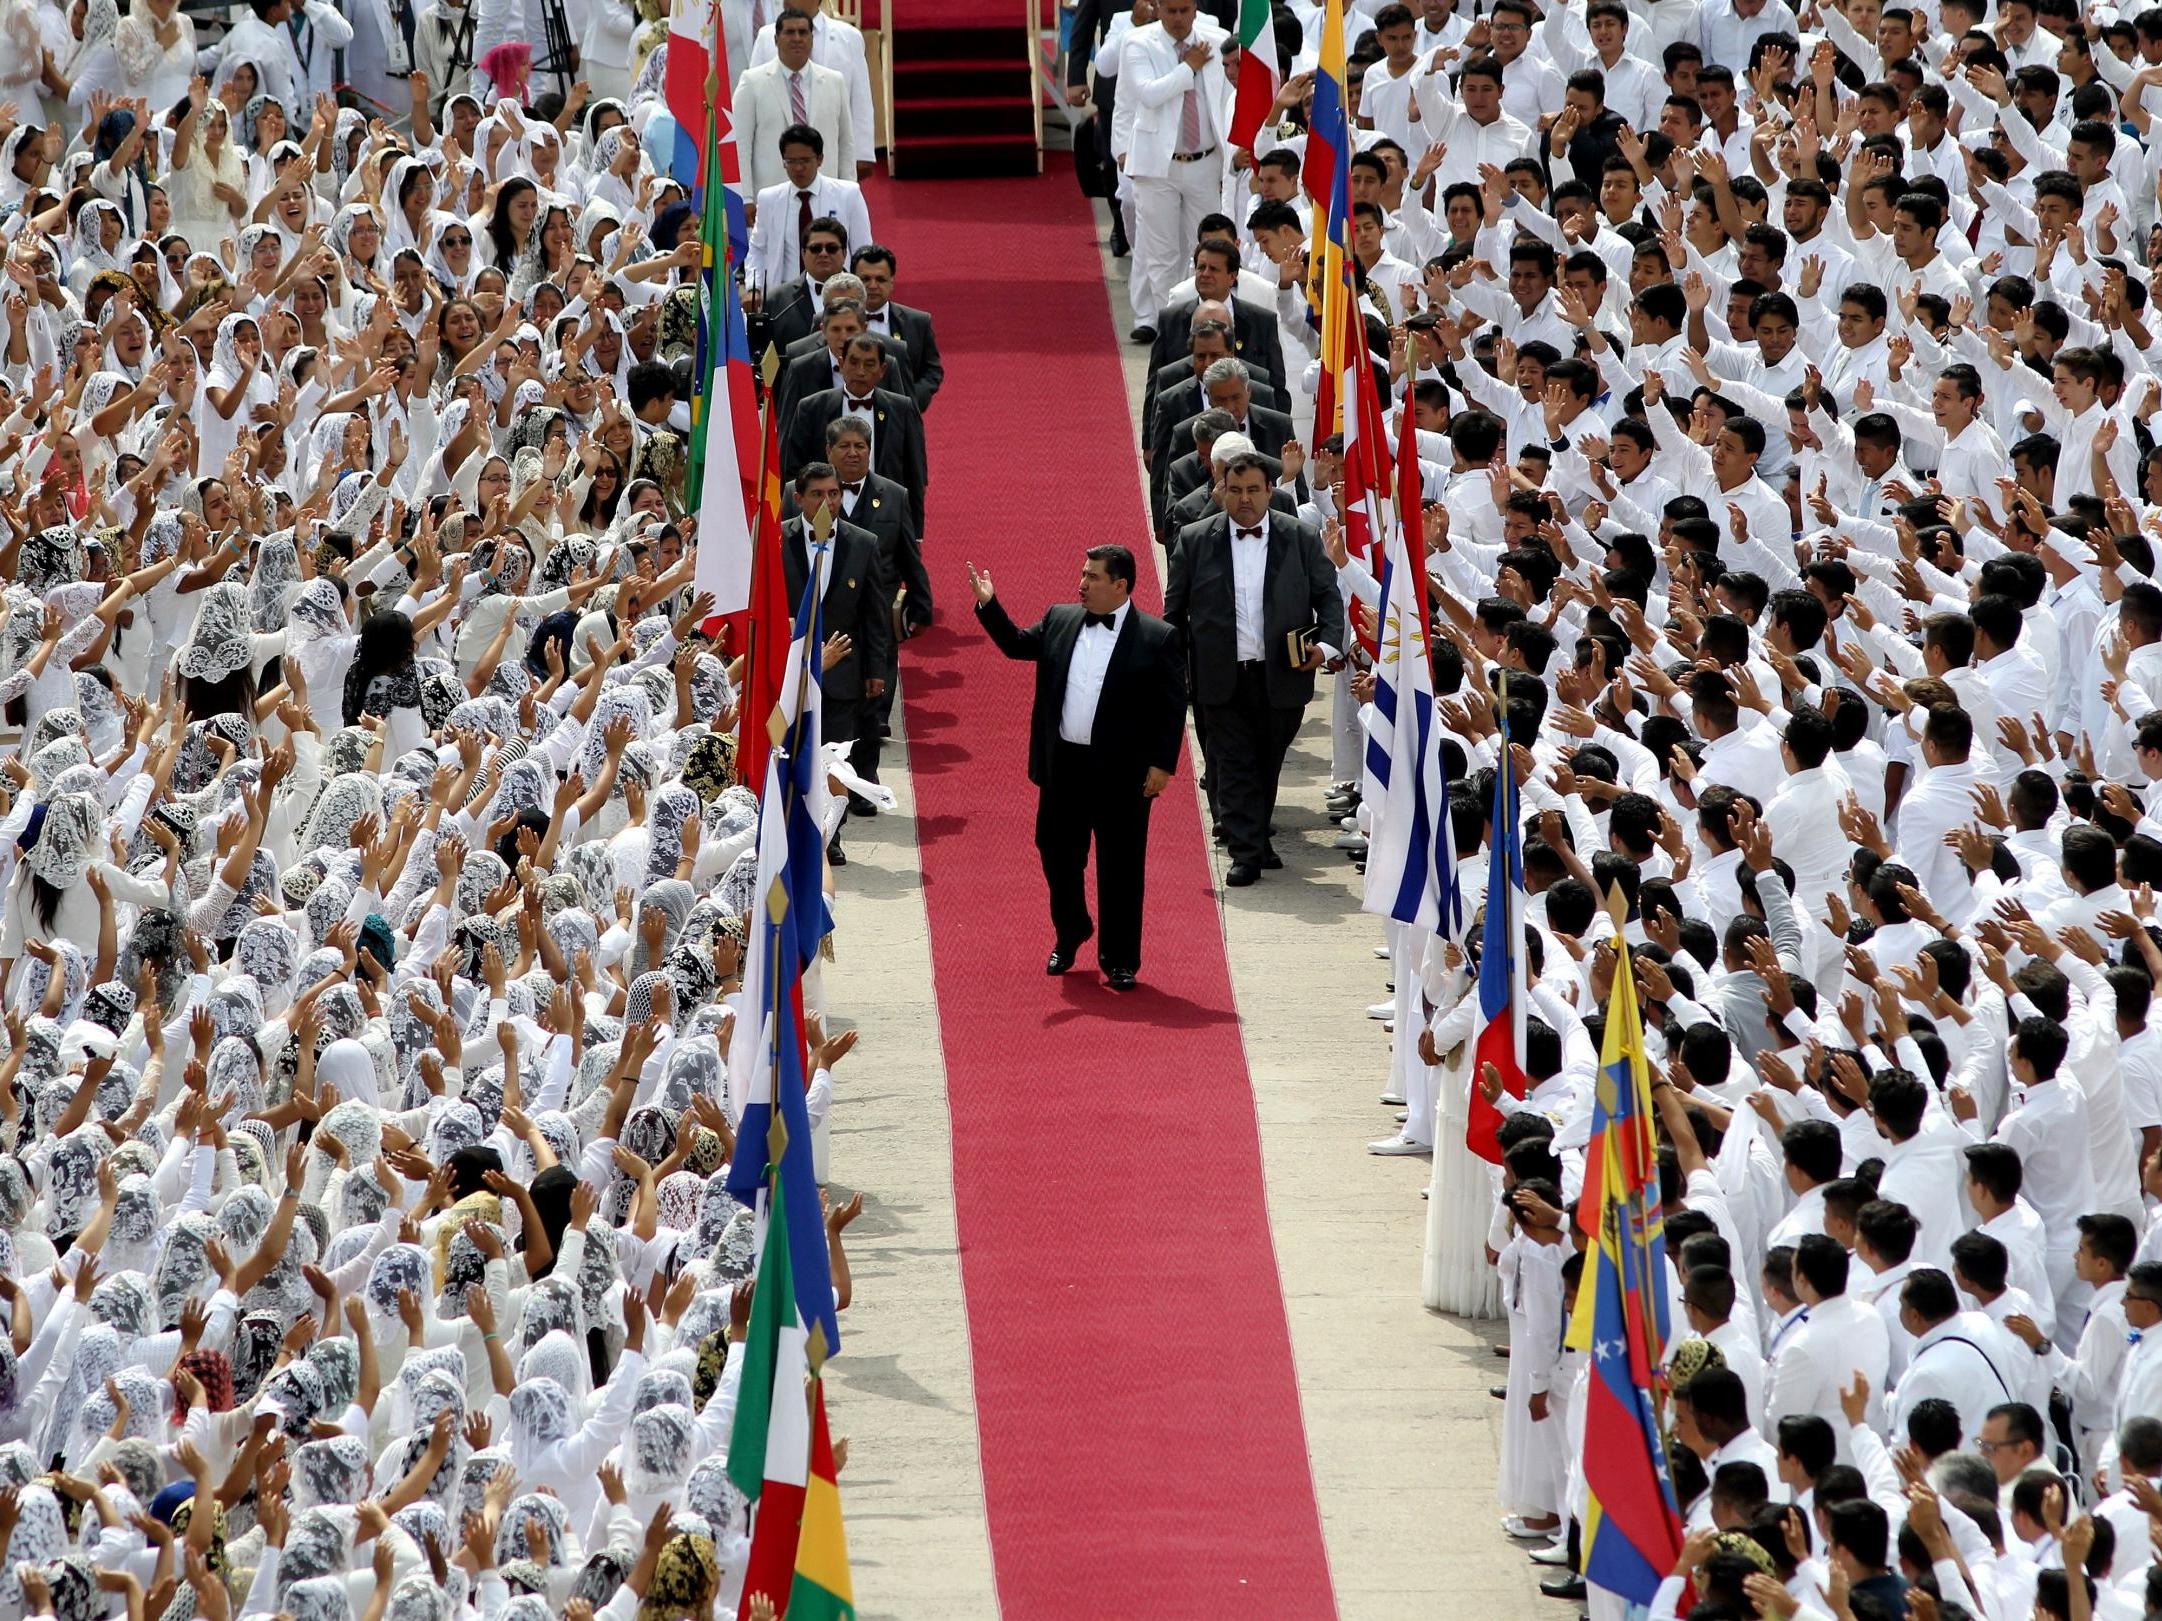 The leader of the Church of the Light of the World, Naason Joaquin Garcia, walks among his parishioners during the annual Holy Convocation at the church's headquarters in Guadalajara, Mexico, 2018